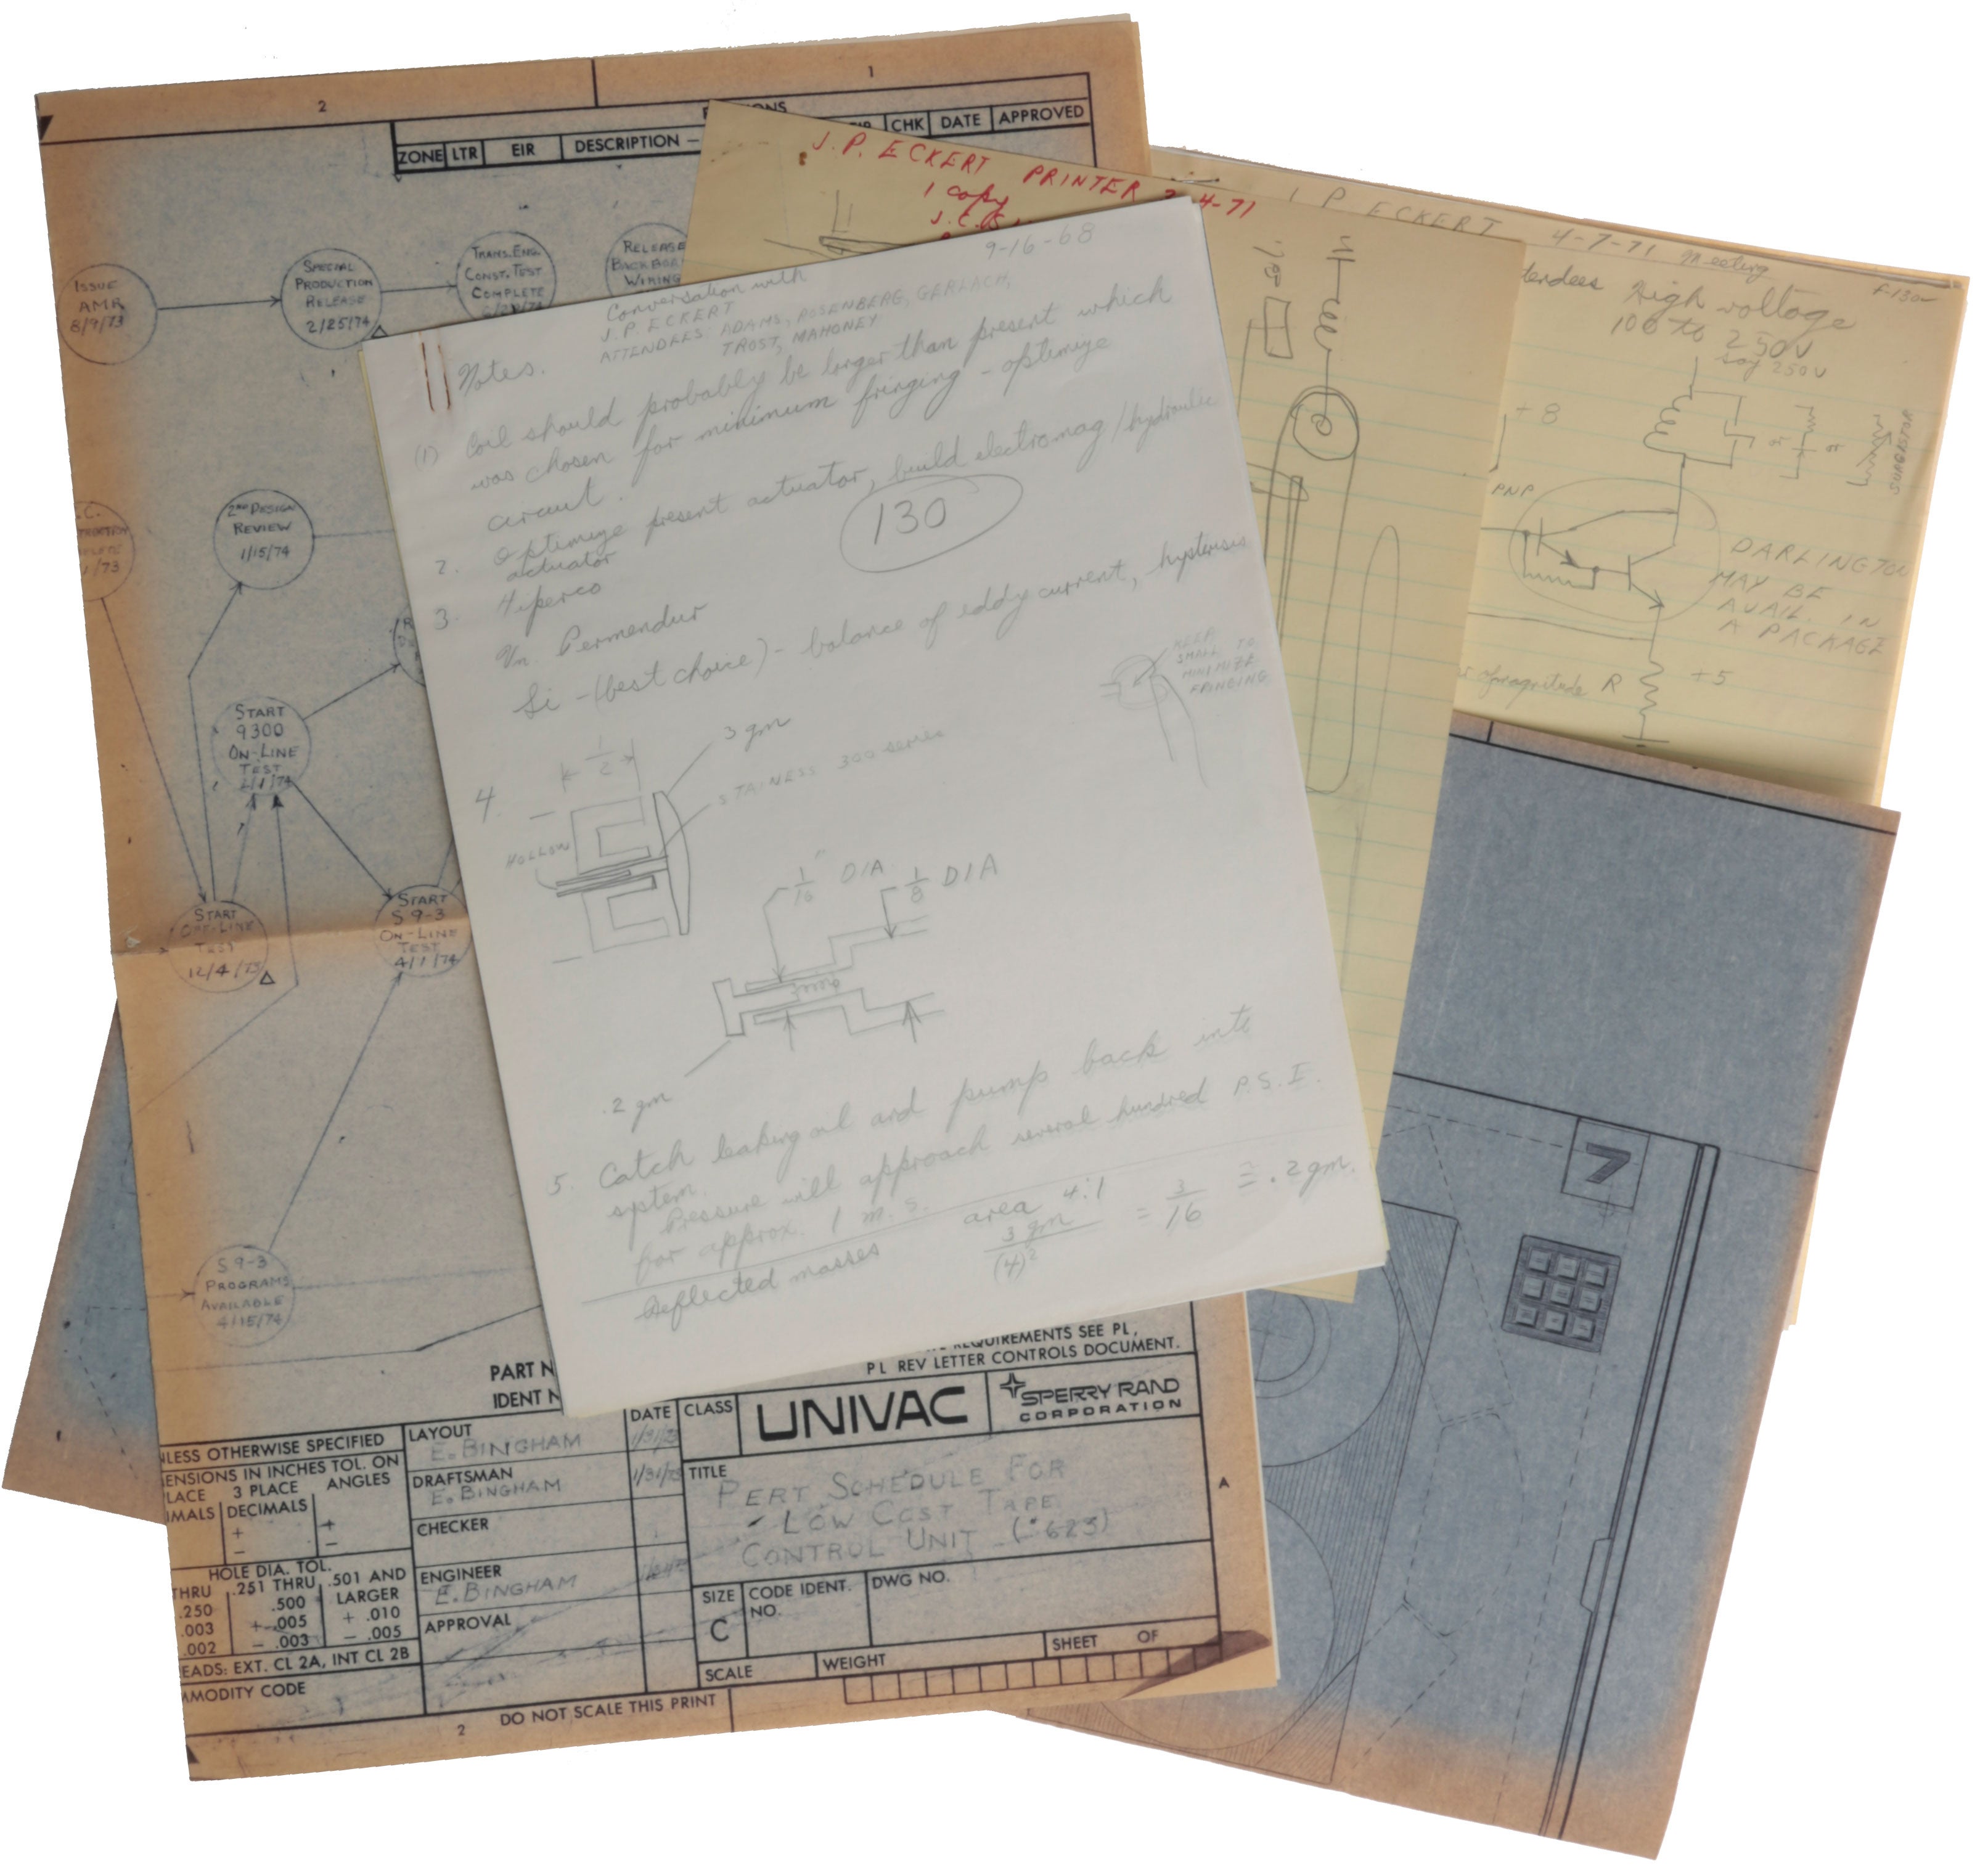 Item #5479 Archive, comprising 19 original in-house documents from J. Presper Eckert’s office, including blueprints, handwritten and typed notes from meetings, and product sample illustrations, 1960s-1970s. UNIVAC.